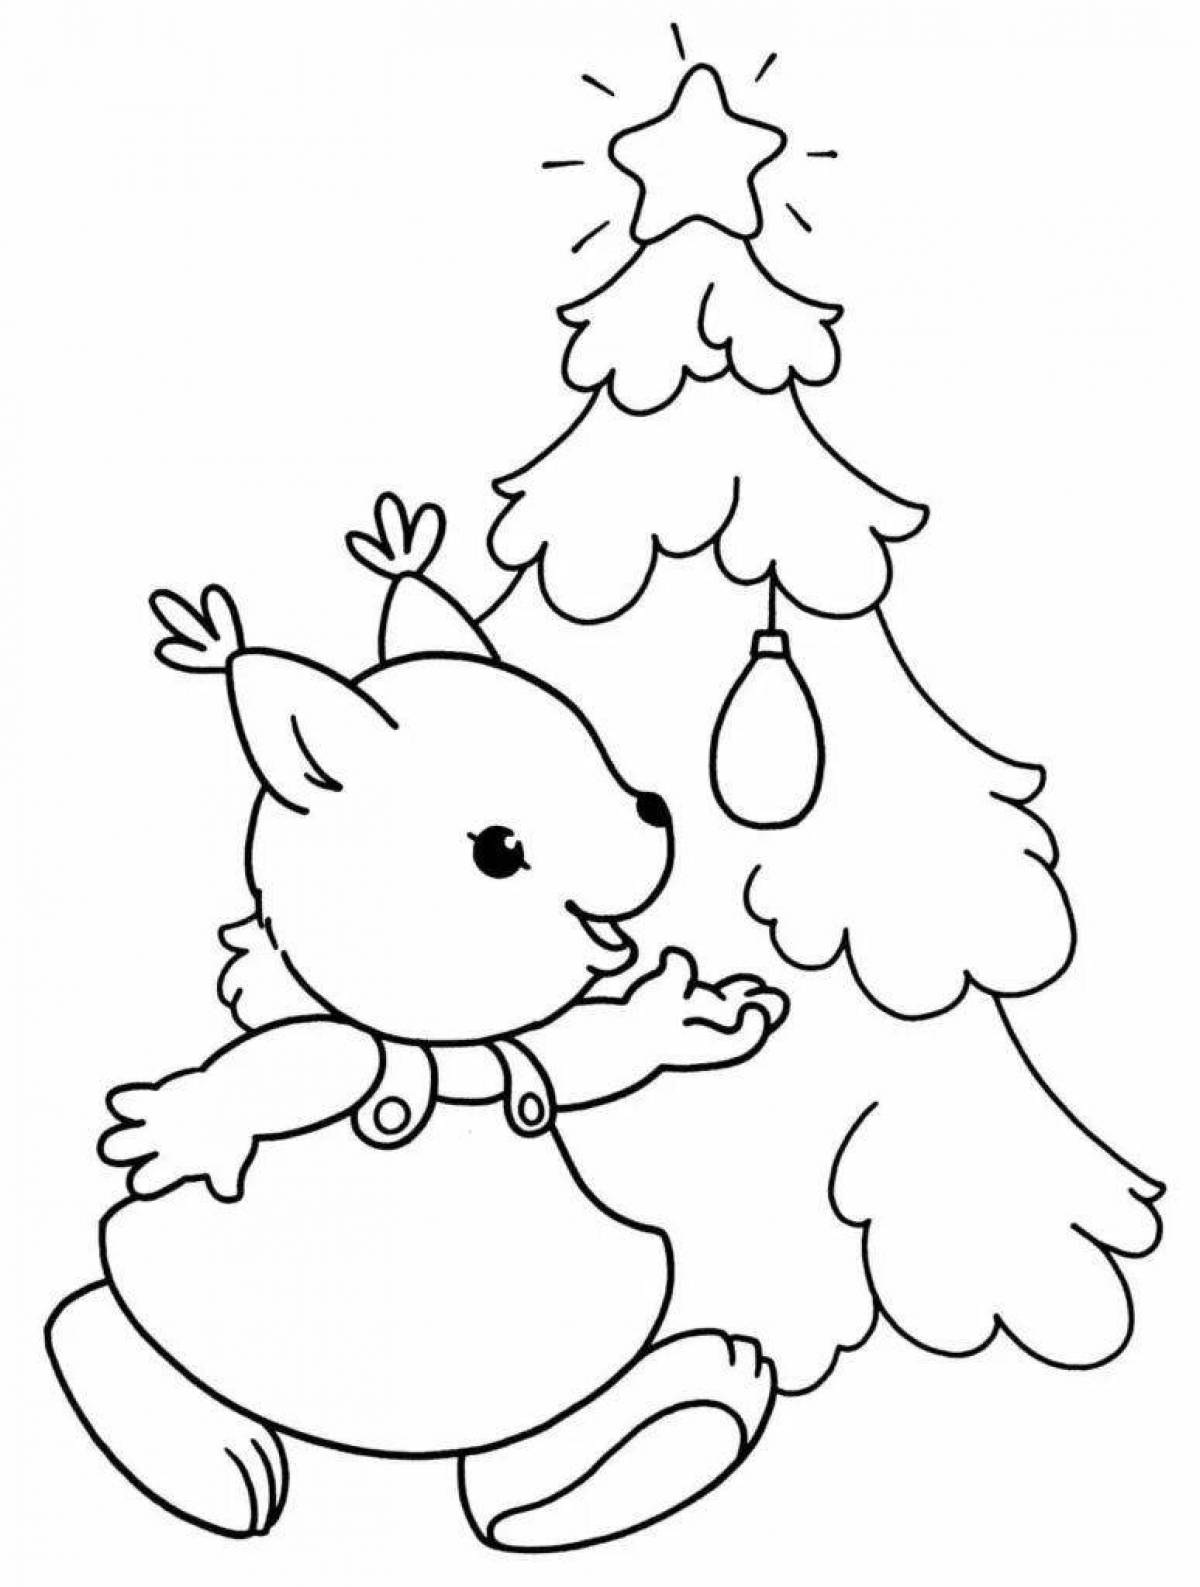 Blessed Christmas coloring book